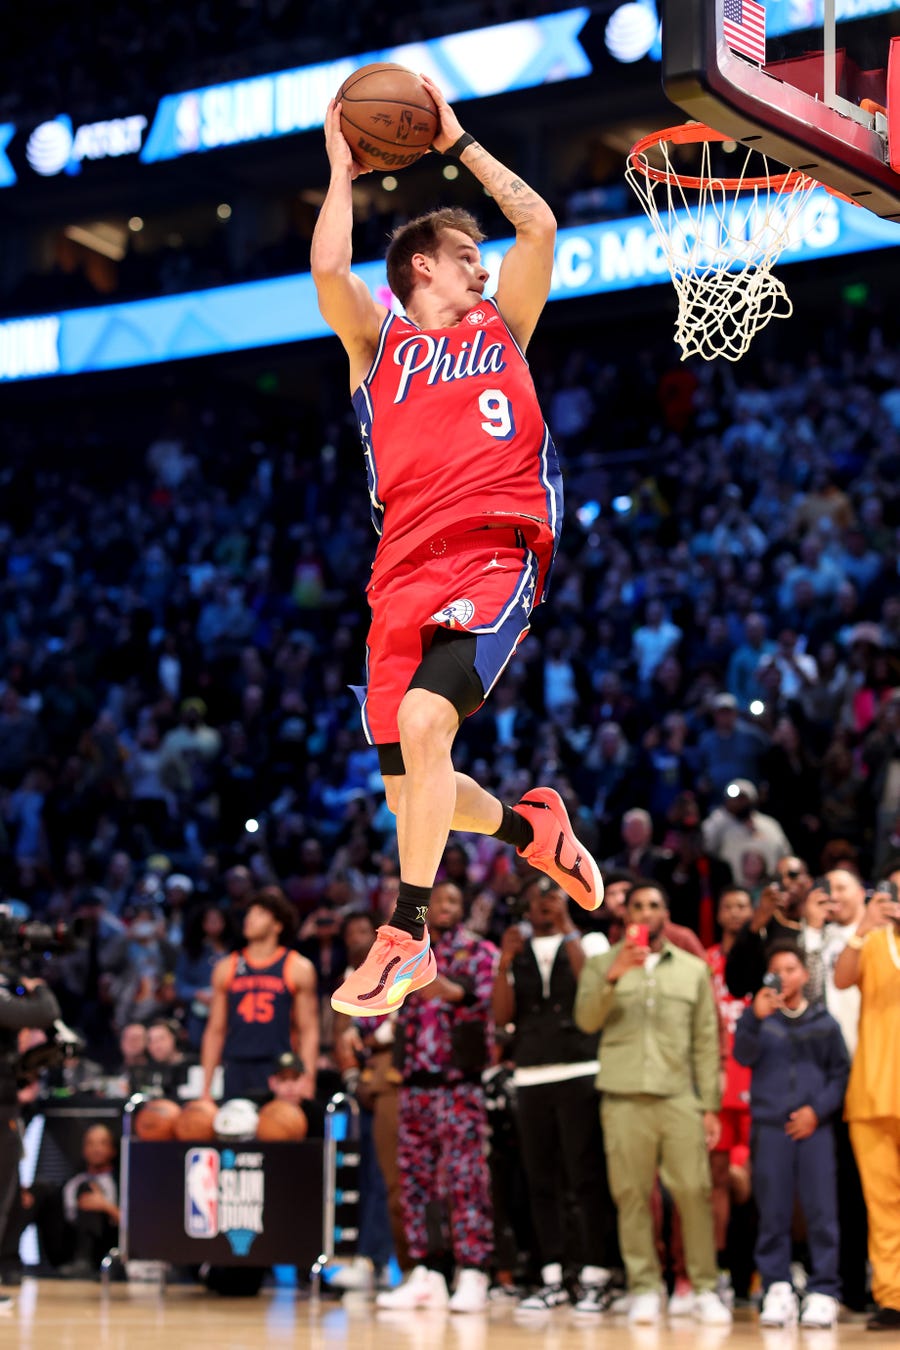 Mac McClung of the Philadelphia 76ers dunks the ball in the 2023 NBA All Star AT&T Slam Dunk Contest at Vivint Arena on February 18, 2023 in Salt Lake City, Utah.